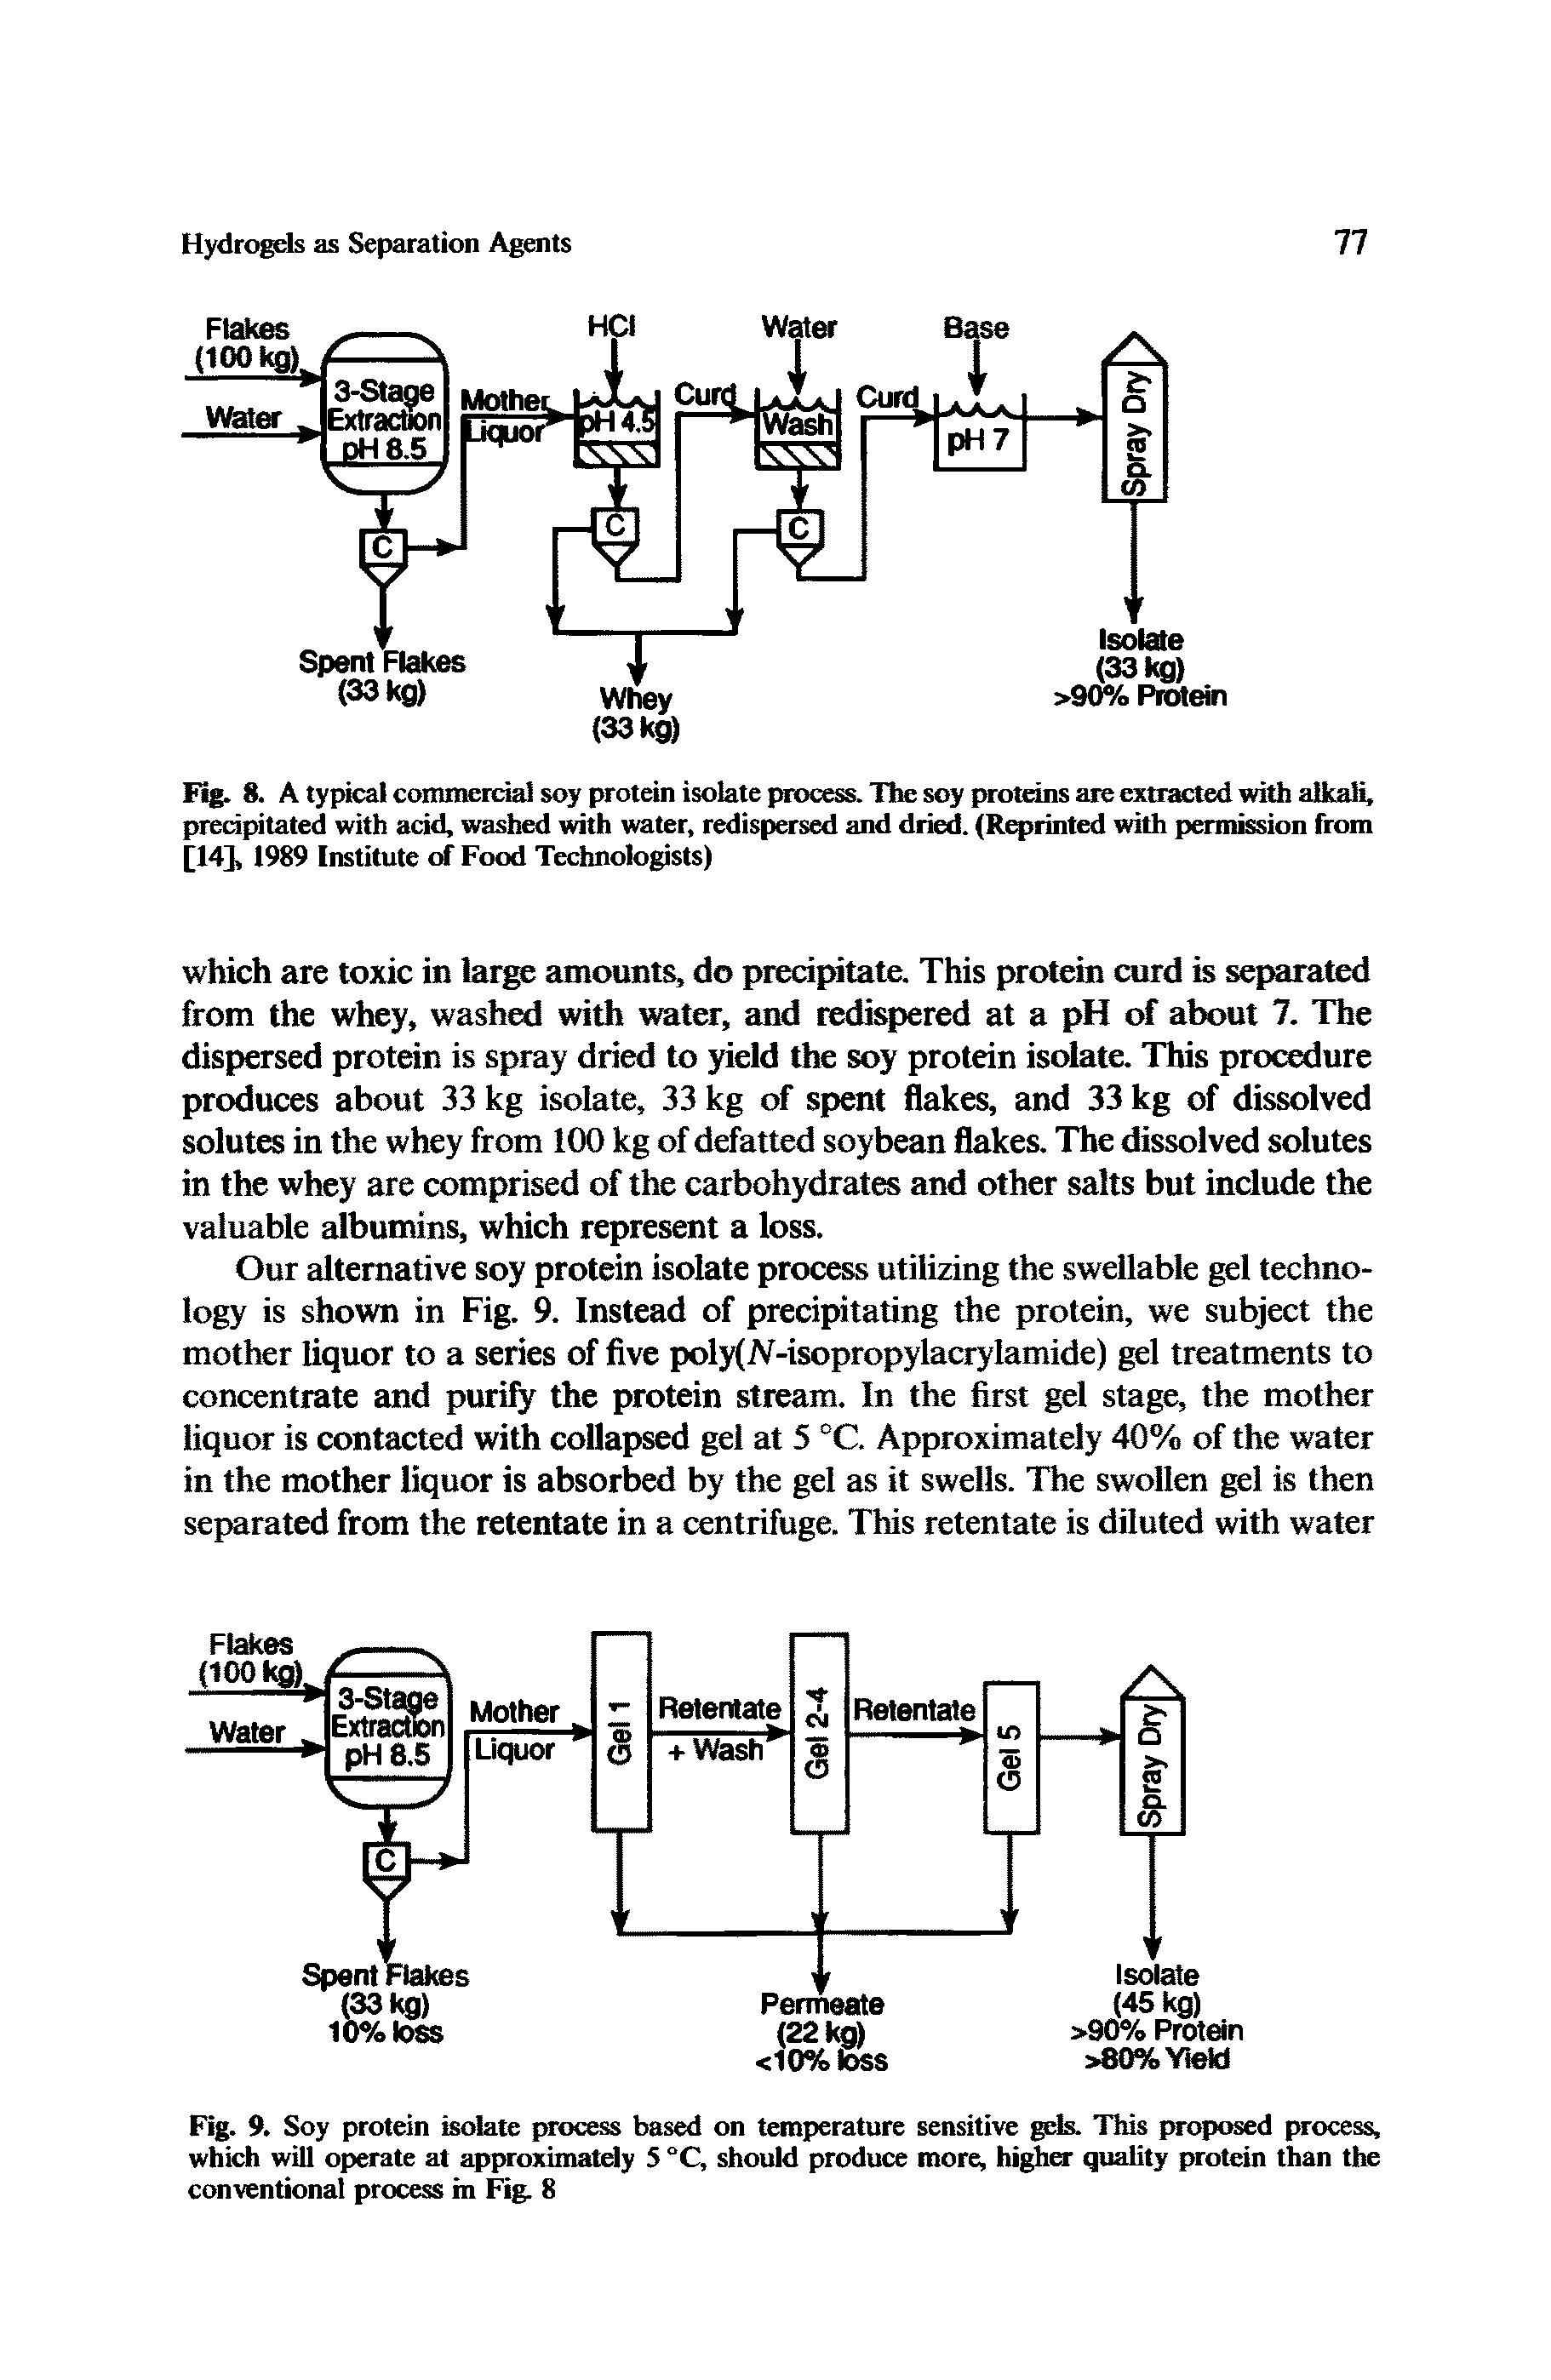 Fig. 8. A typical commercial soy protein isolate process. The soy proteins are extracted with alkali, precipitated with acid, washed with water, redispersed and dried. (Reprinted with permission from [14], 1989 Institute of Food Technologists)...